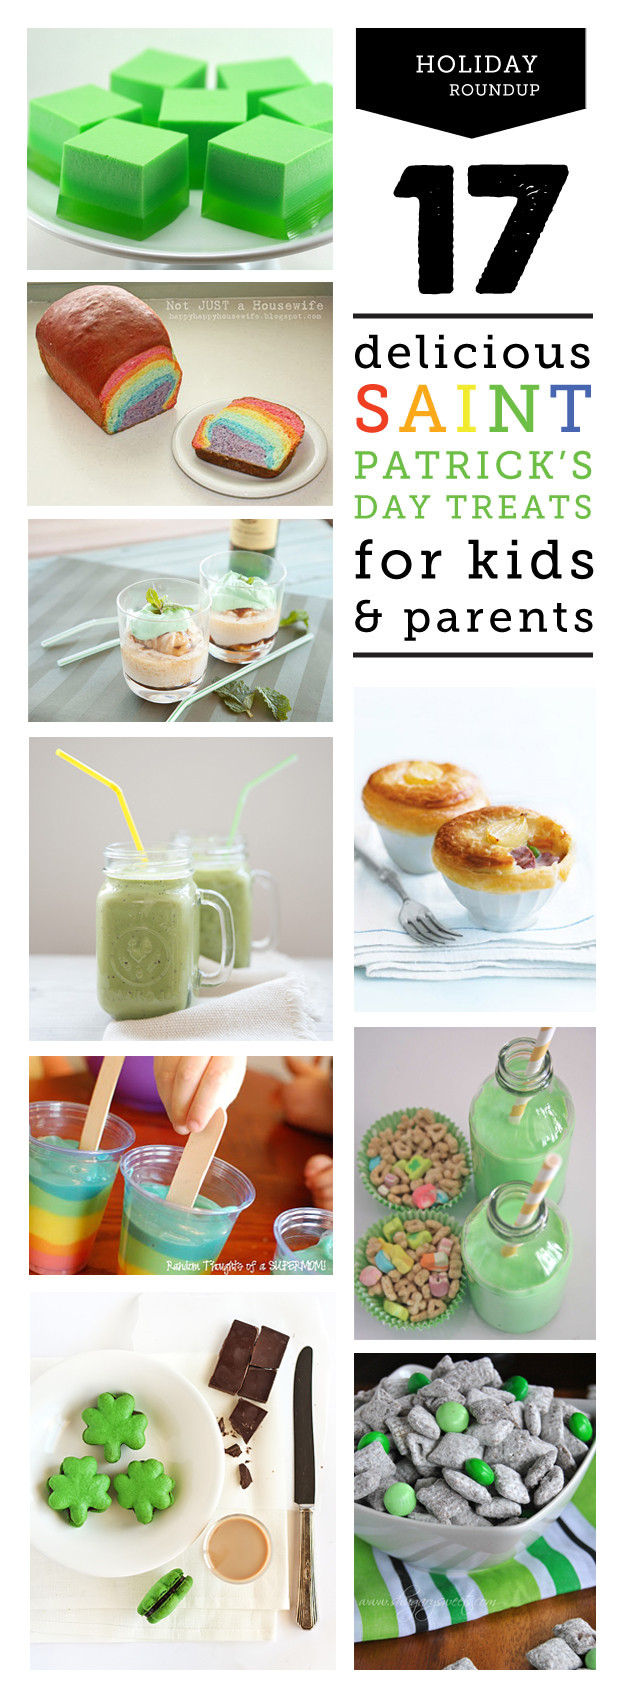 St Patrick Day Recipes Kids
 St Patrick’s Day Recipes and Treats for Kids and Adults